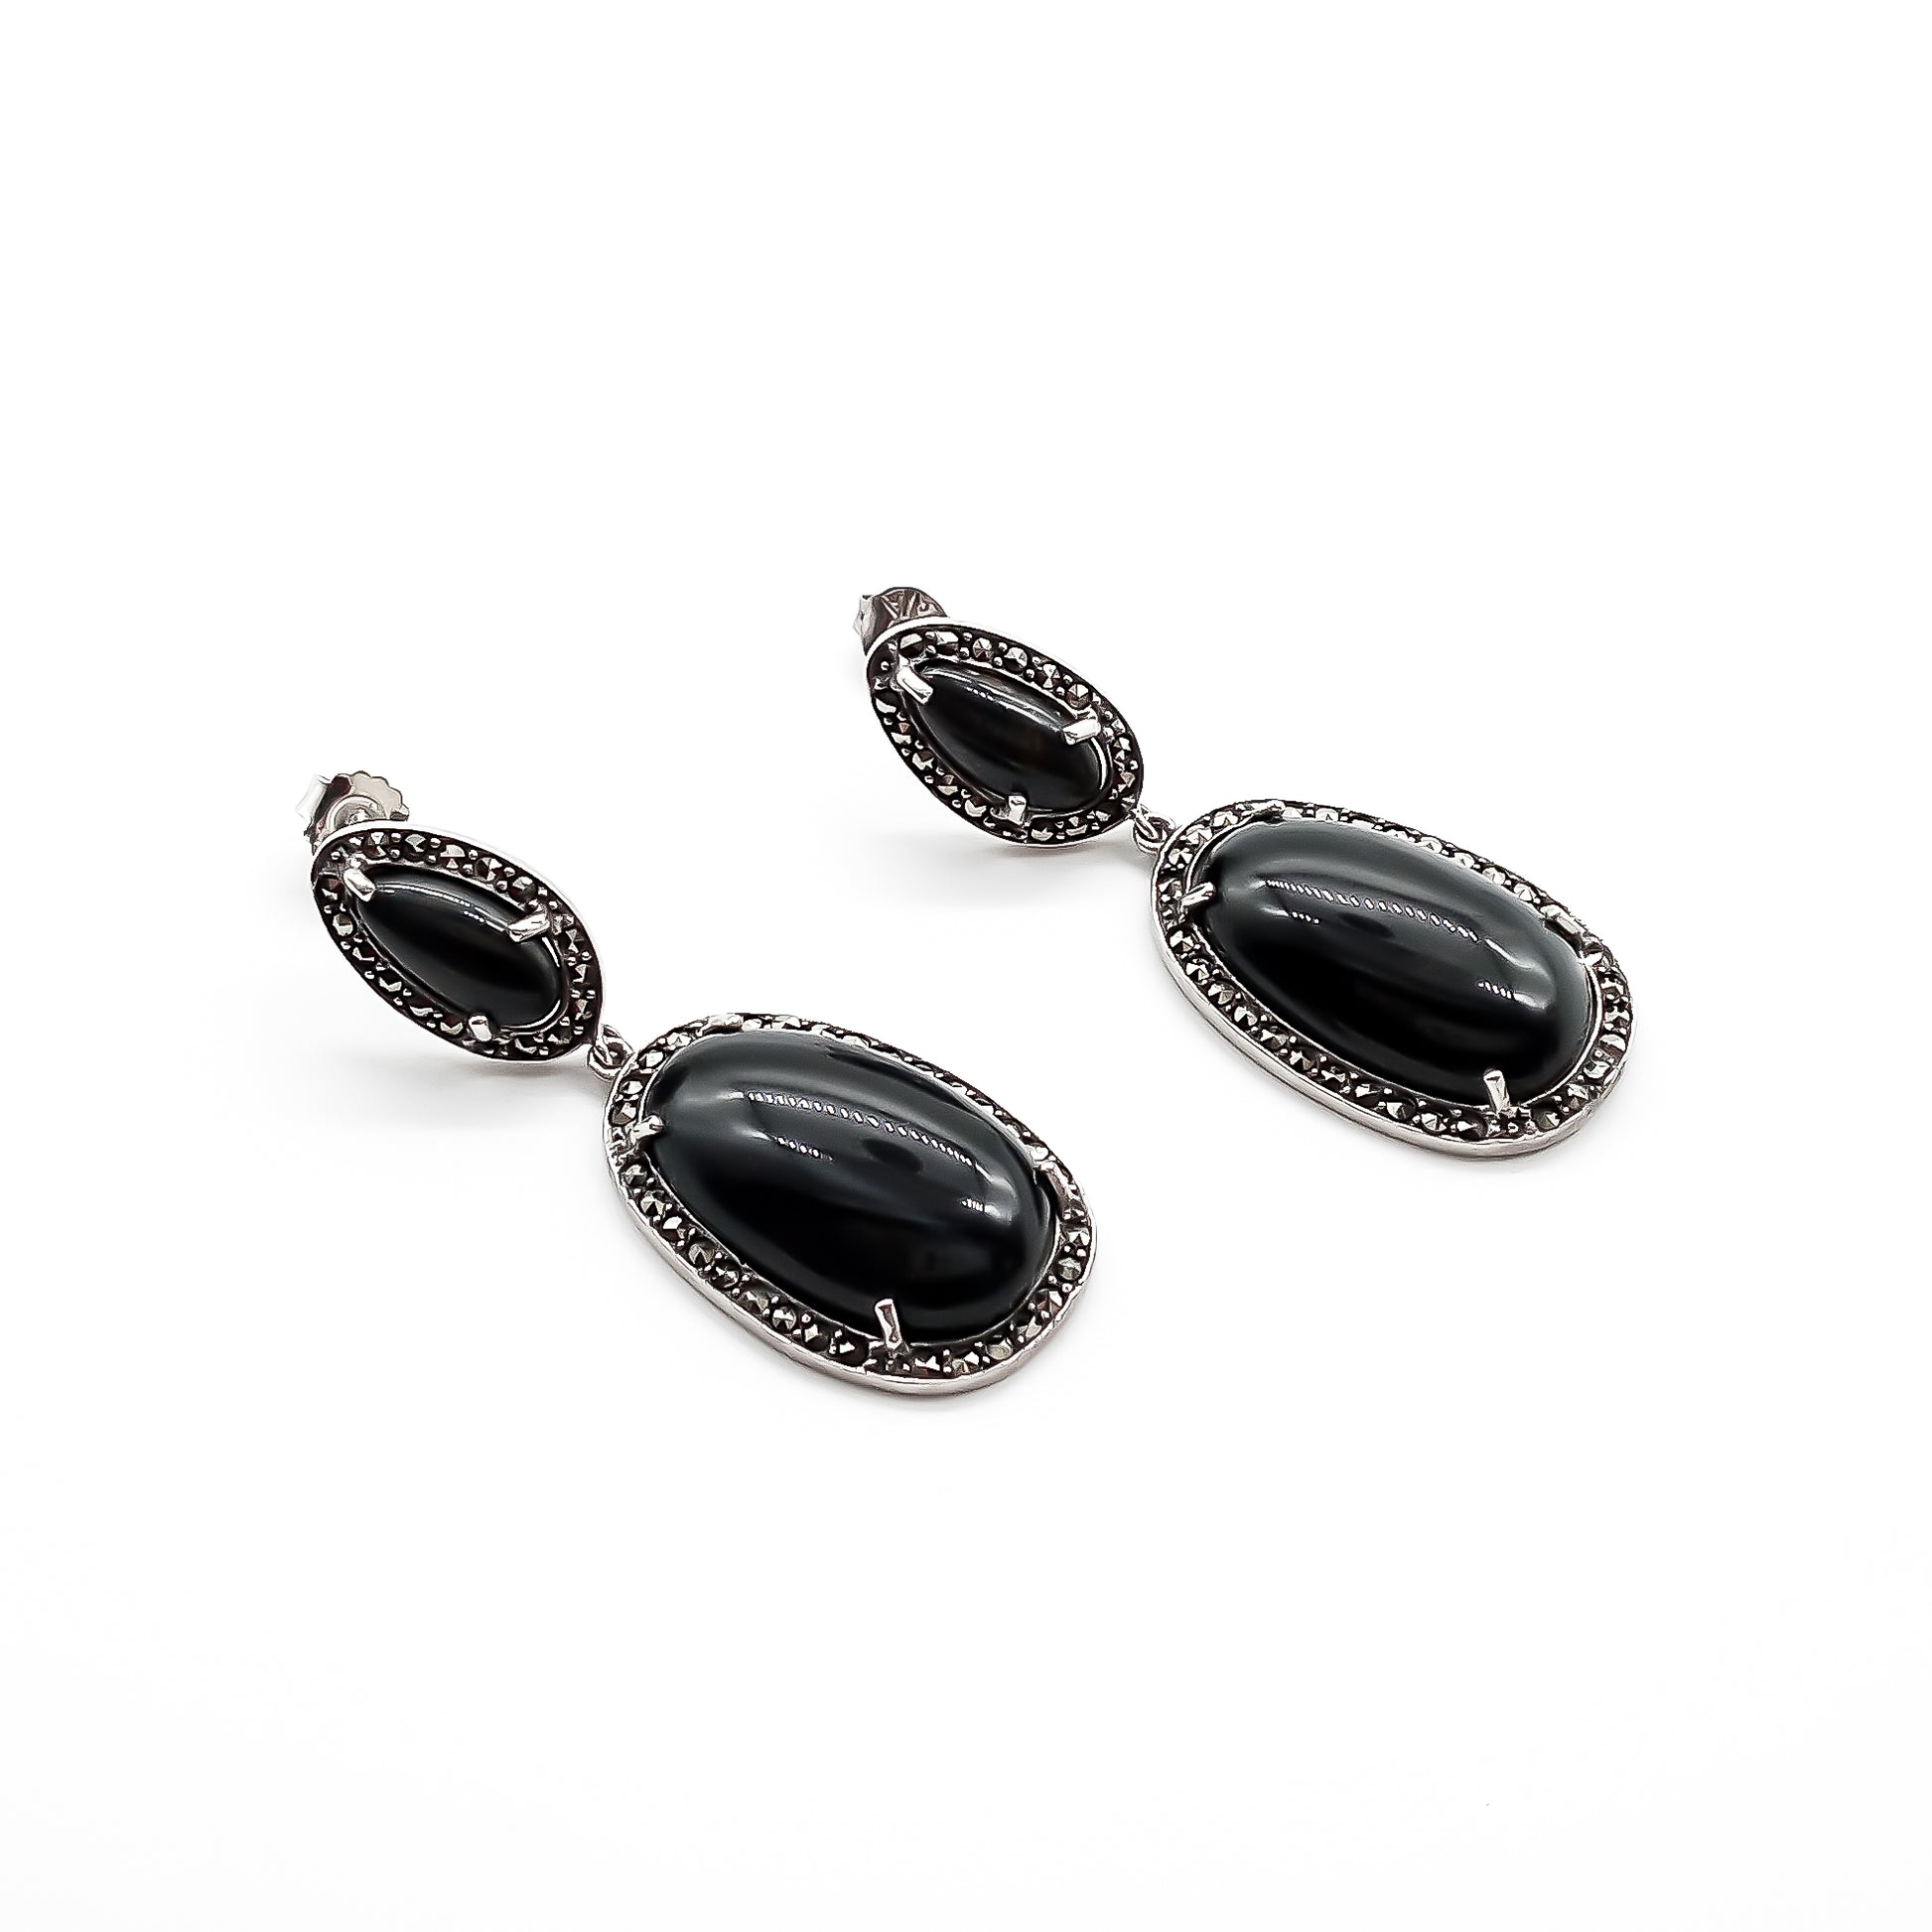 Stylish sterling silver drop earrings, each set with two black tiger’s eye cabochon stones, surrounded by marcasites. Circa 1950’s